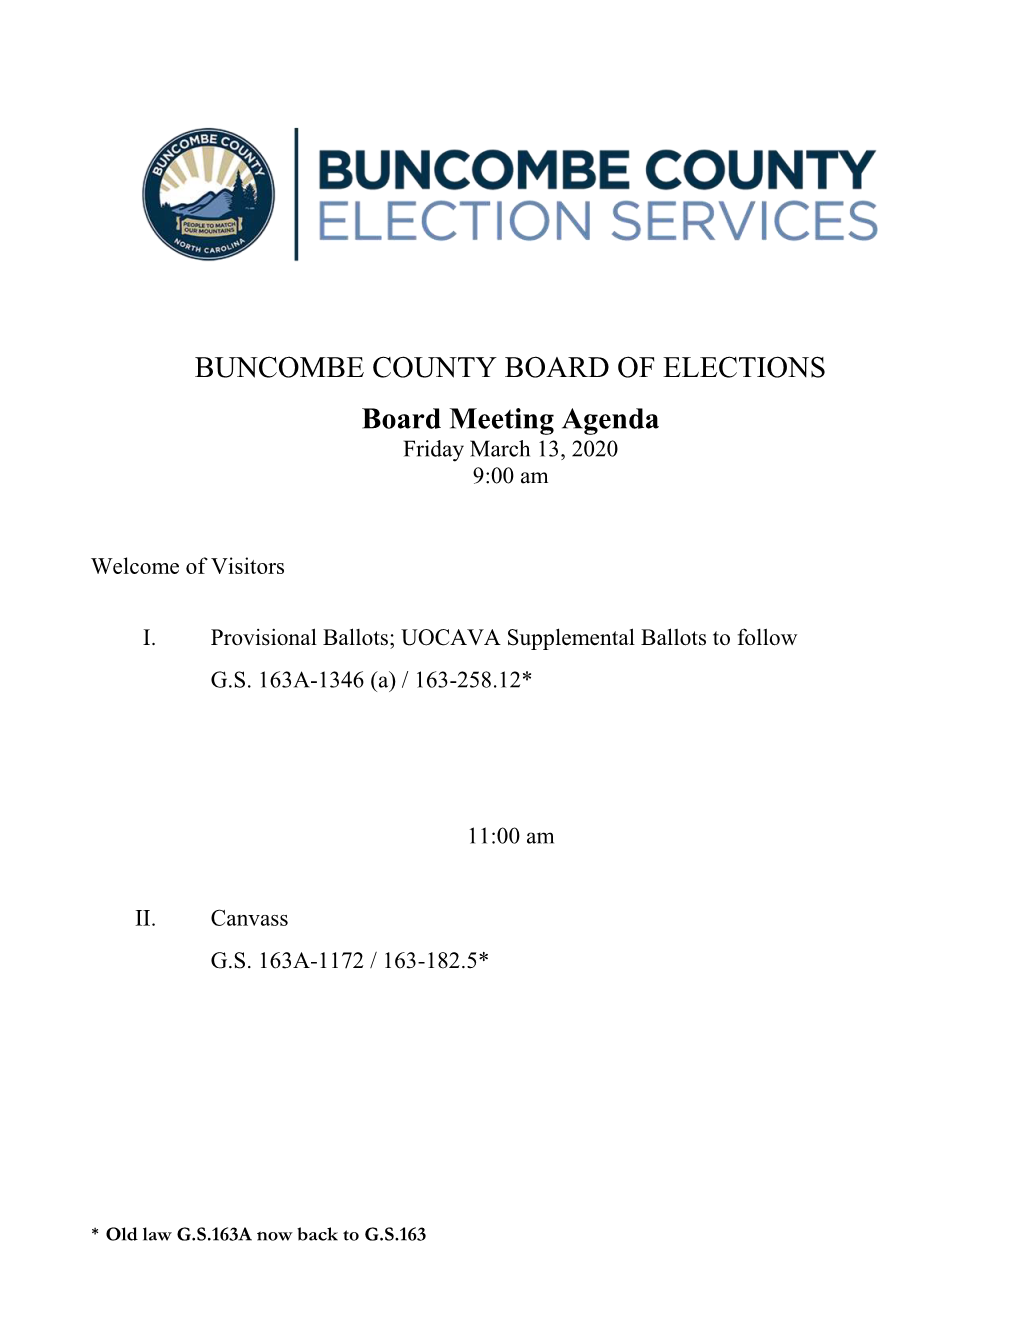 BUNCOMBE COUNTY BOARD of ELECTIONS Board Meeting Agenda Friday March 13, 2020 9:00 Am